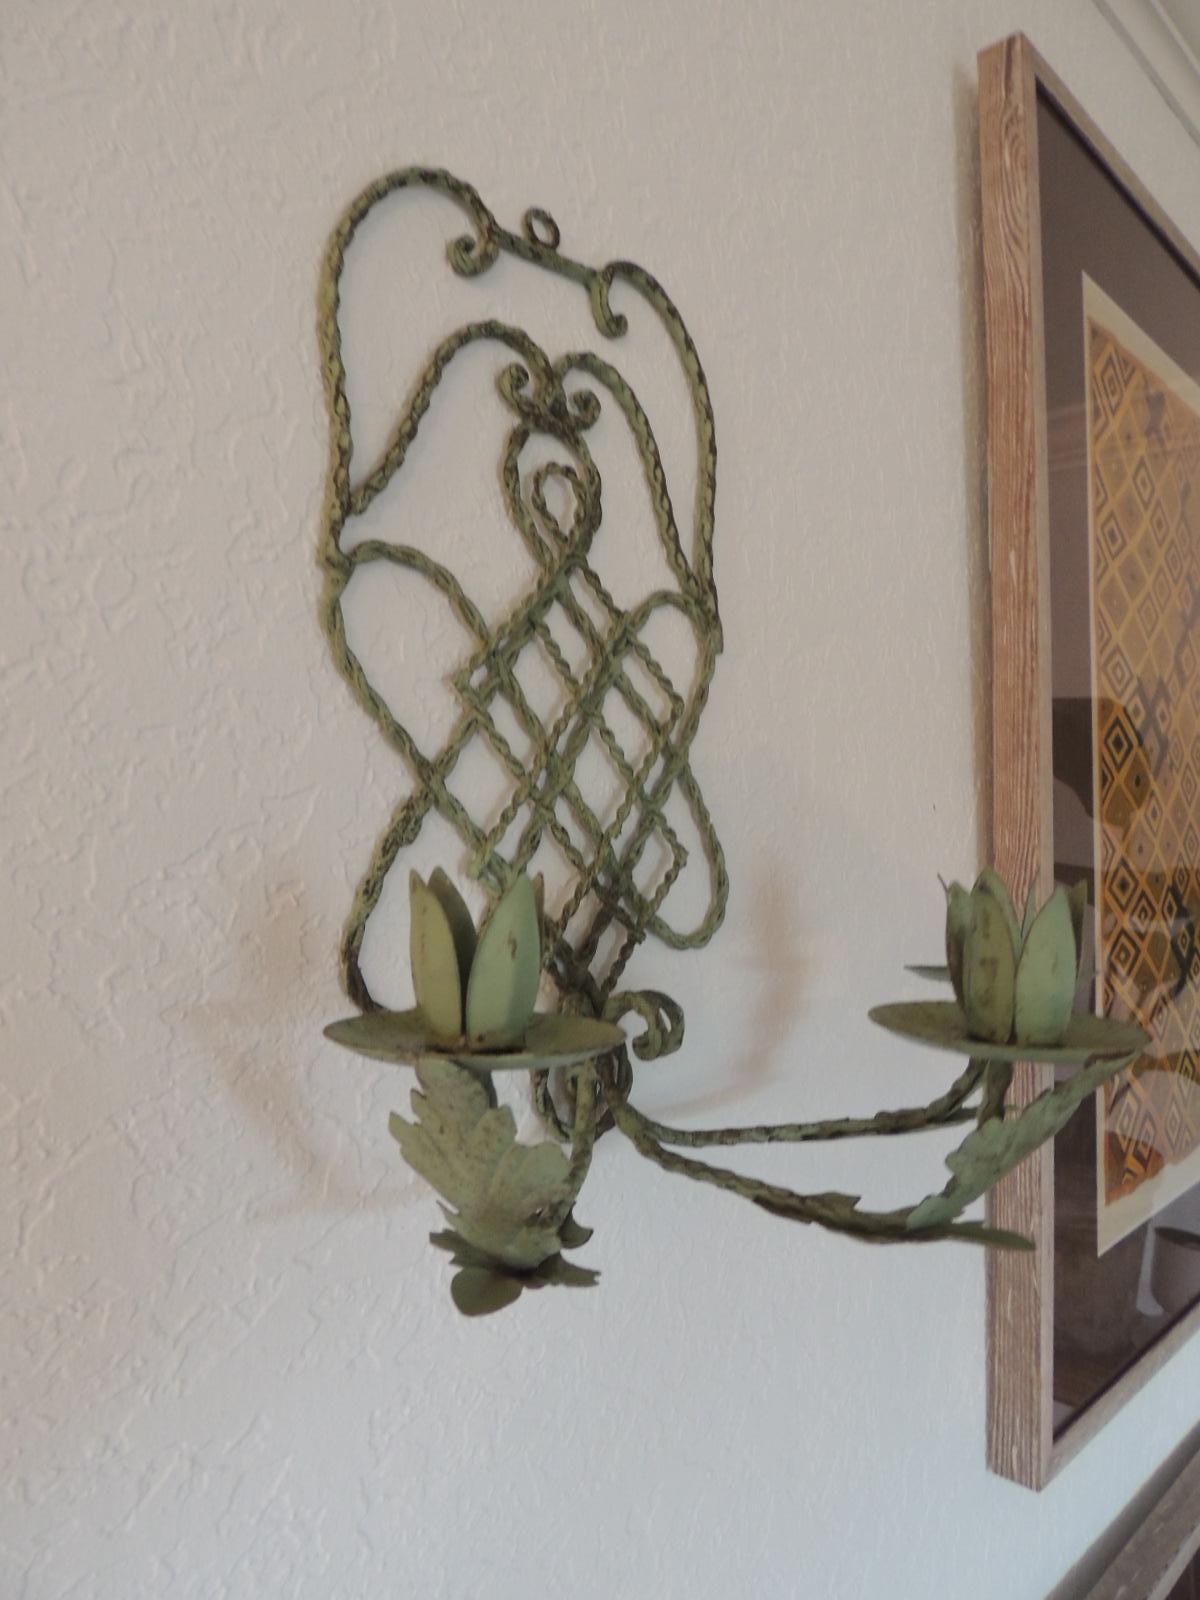 Tole vintage Verdigris candle wall sconce.
Wall sconce with three candle holders with patina leaves and trellis design back.
Hanging hook on top.
Size: 16